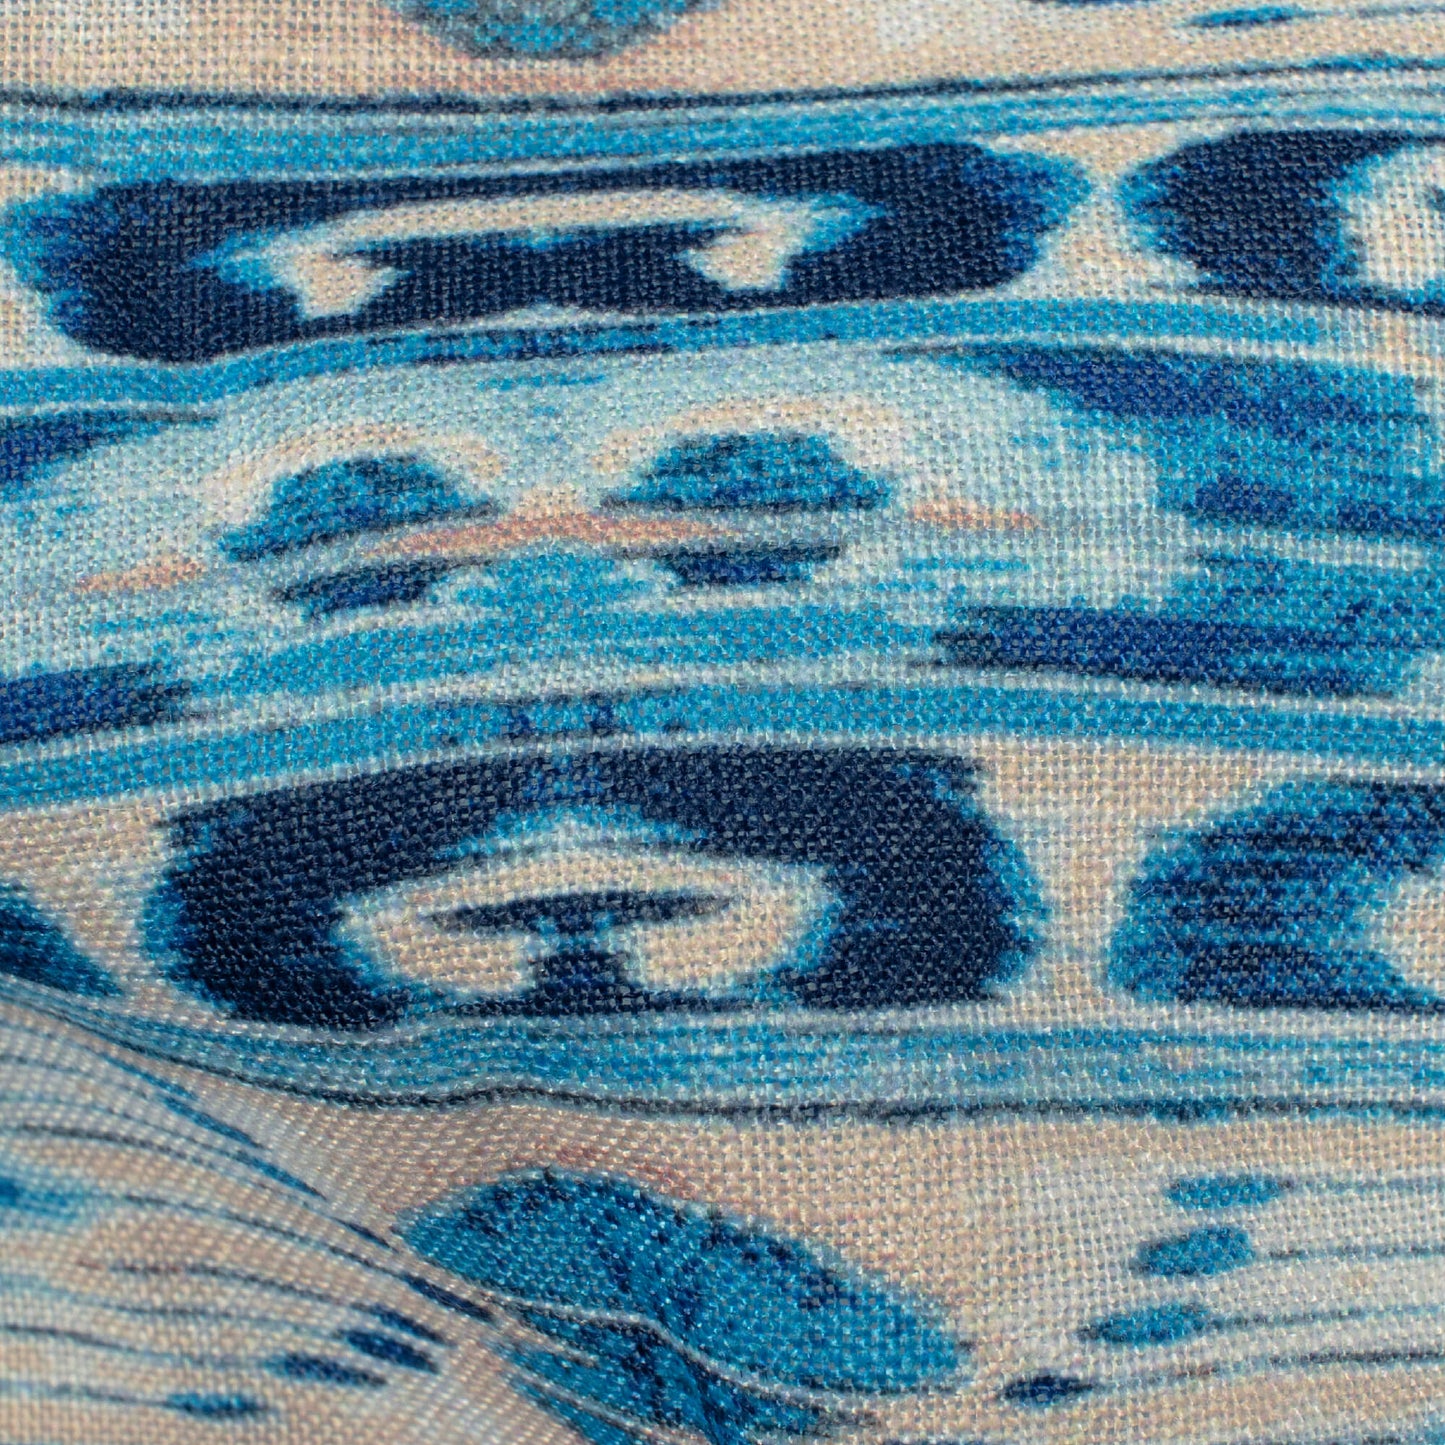 Cerulean Blue And Cream Stripes Pattern Digital Print Linen Textured Fabric (Width 56 Inches)